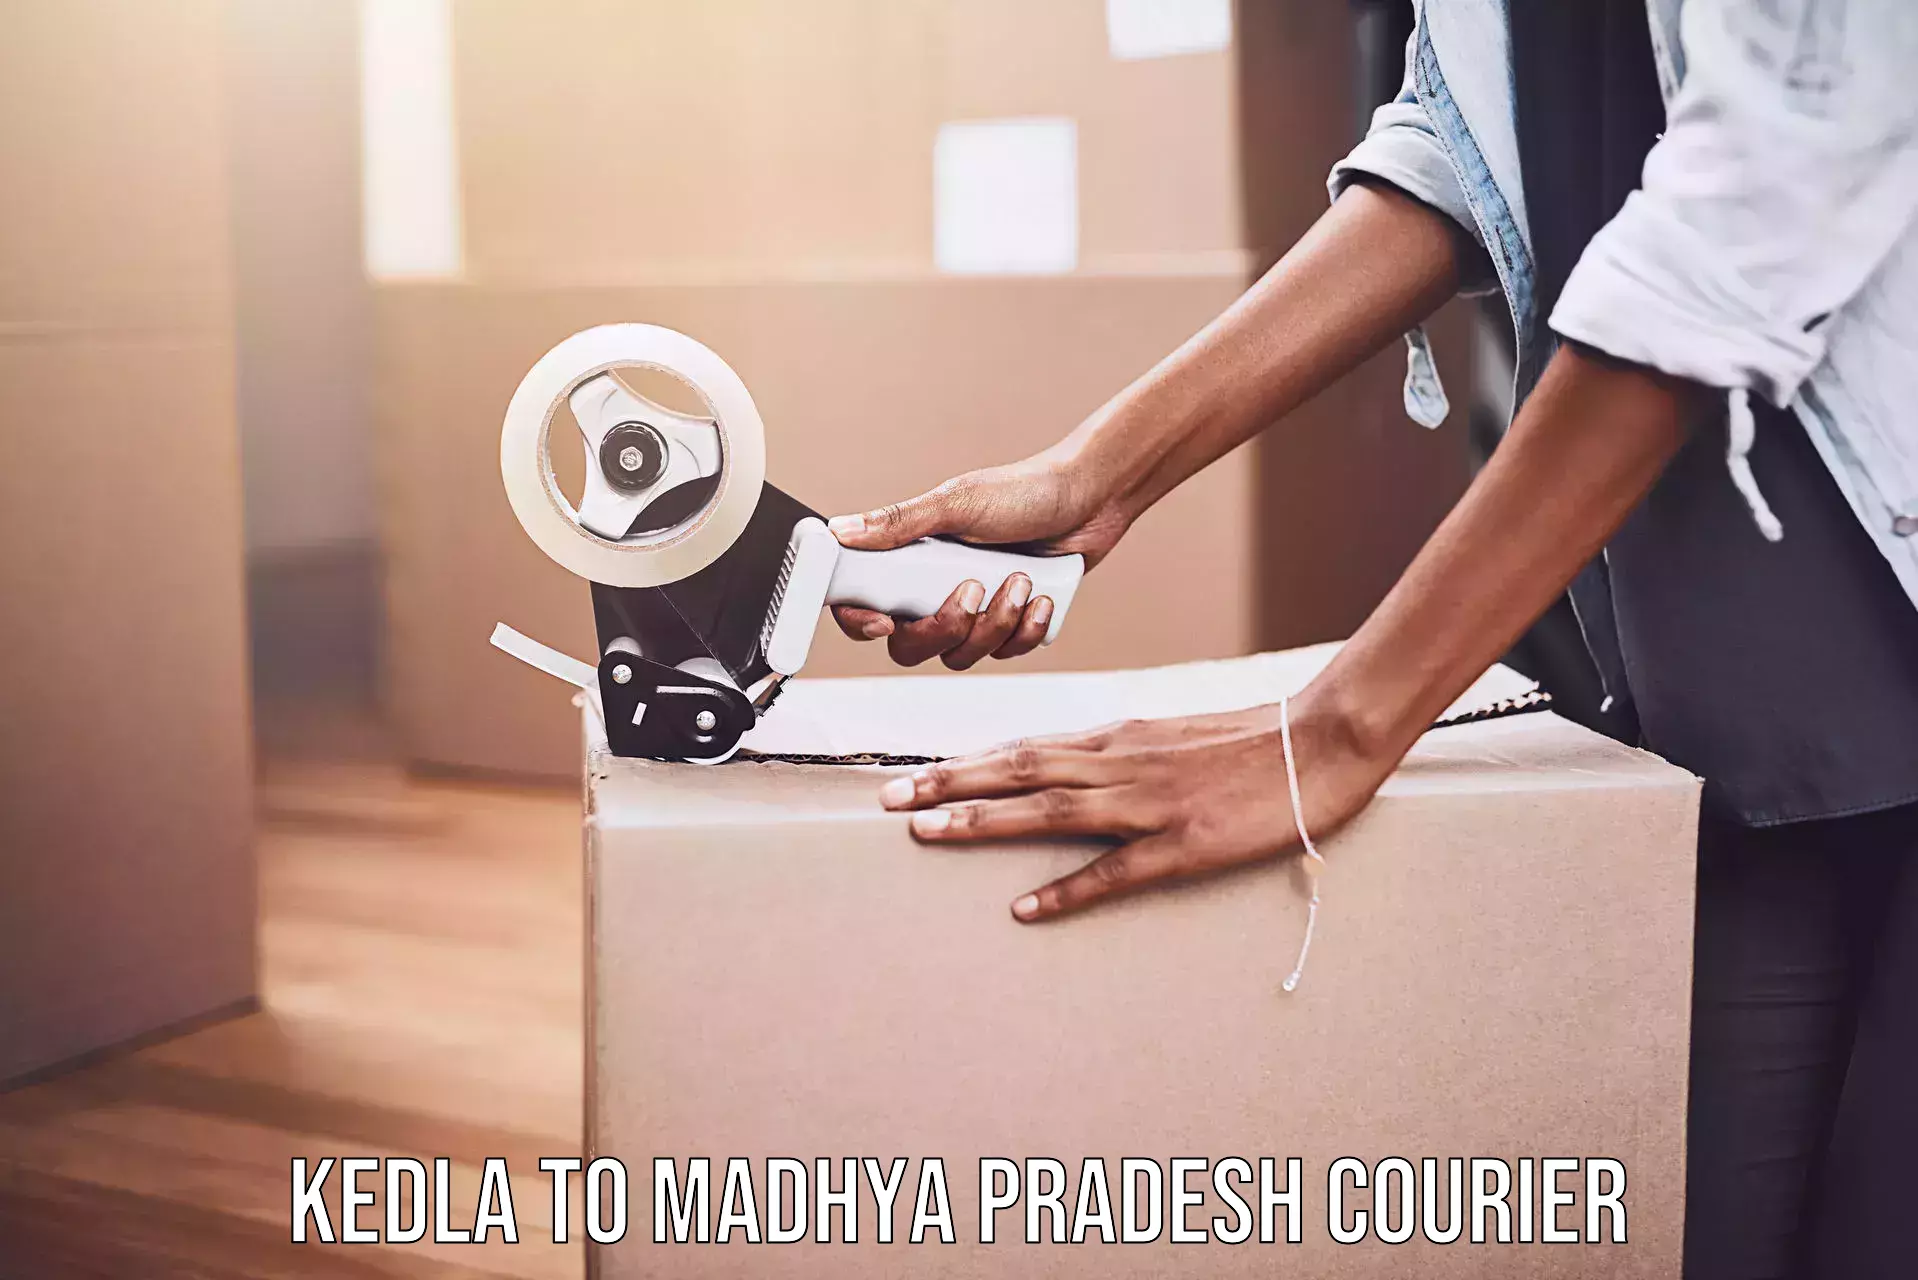 Custom courier packages Kedla to Indore